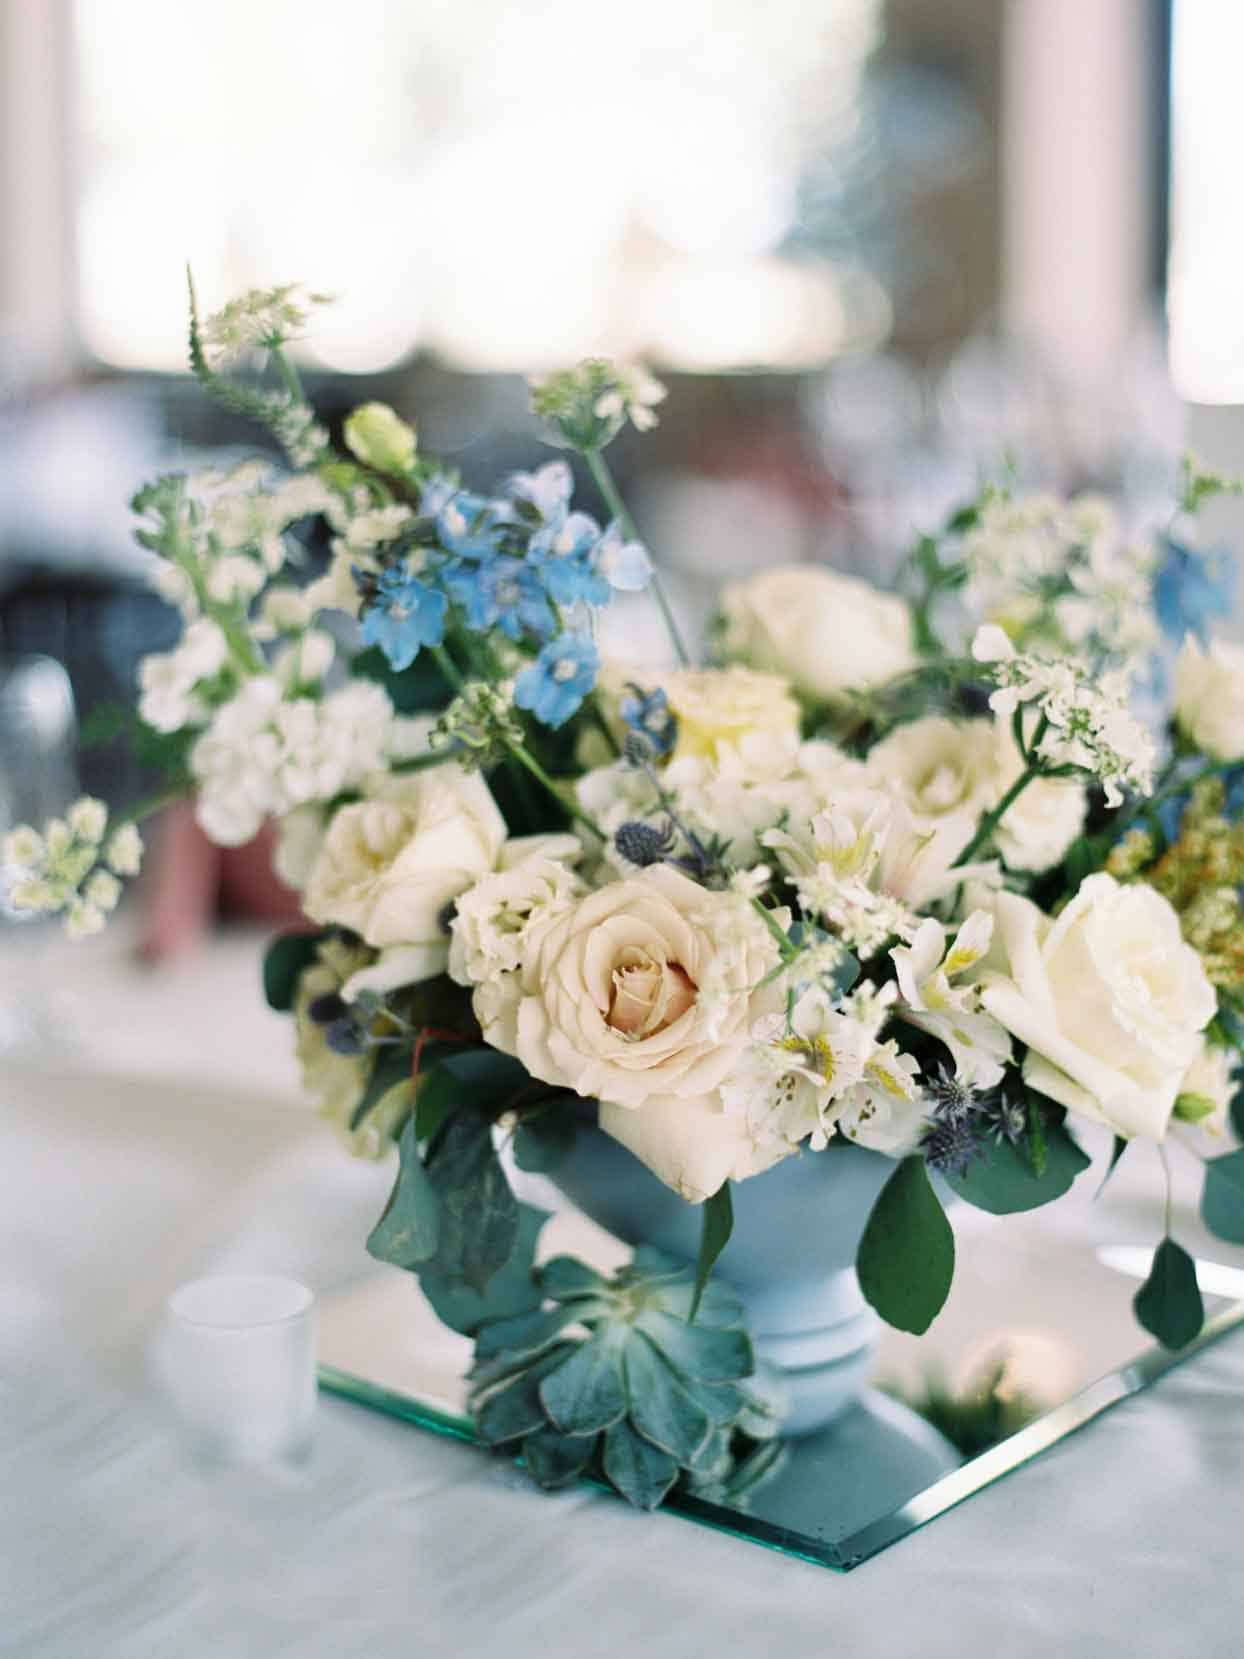 Incredible Blue and White Flowers Arranged by Victorian Gardens